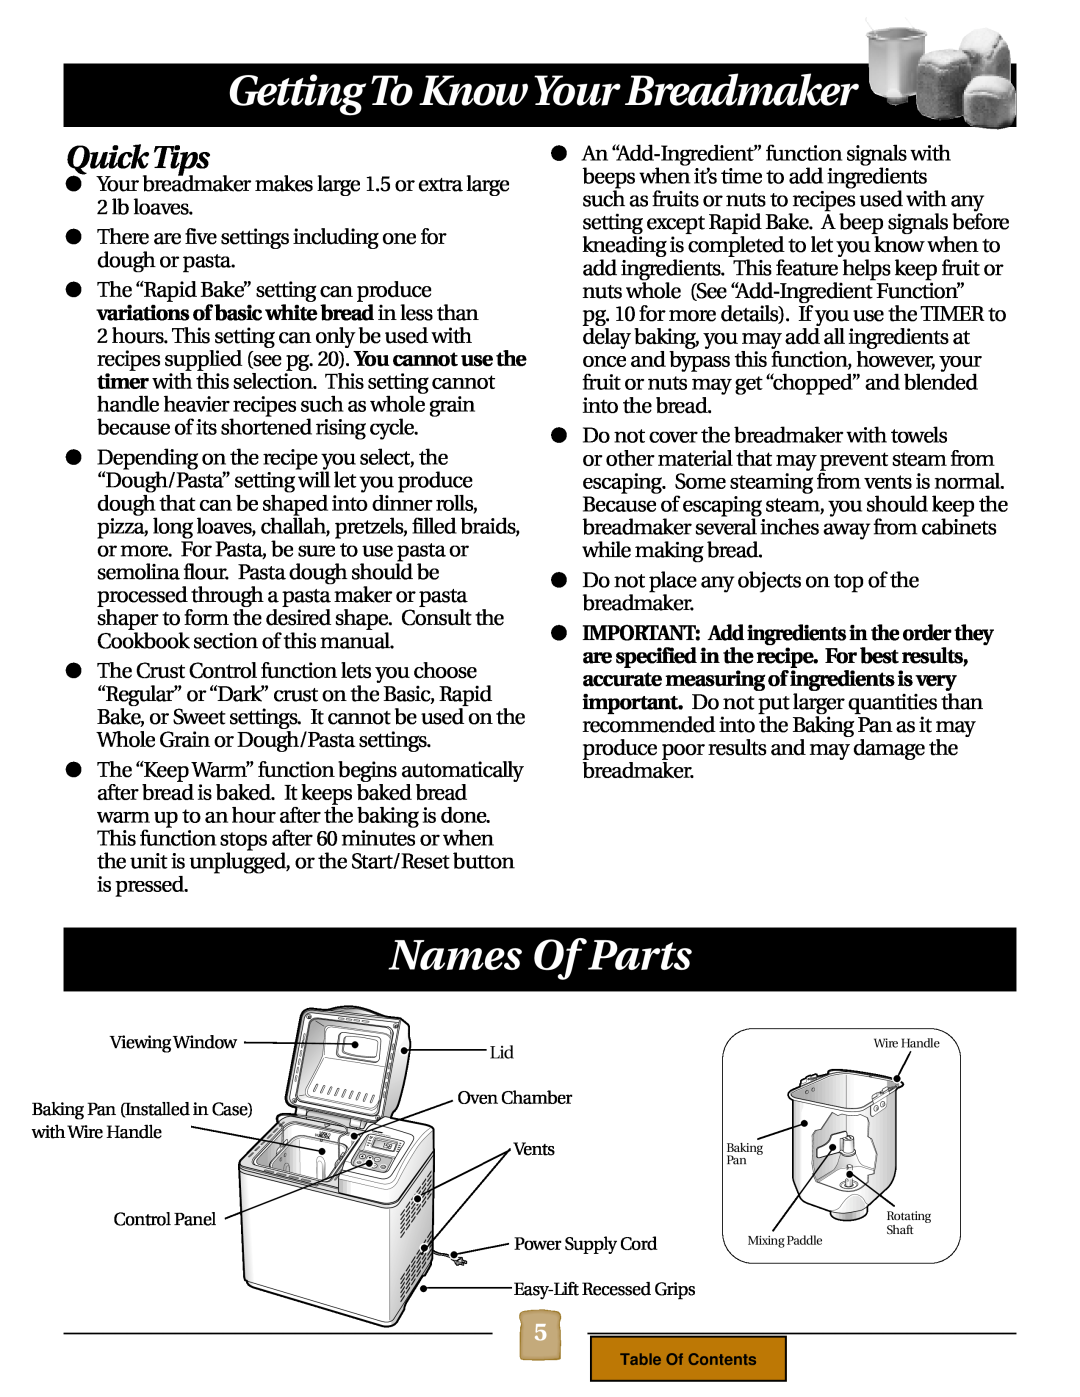 Black & Decker B1620 manual Getting To KnowYour Breadmaker, Names Of Parts, Quick Tips 